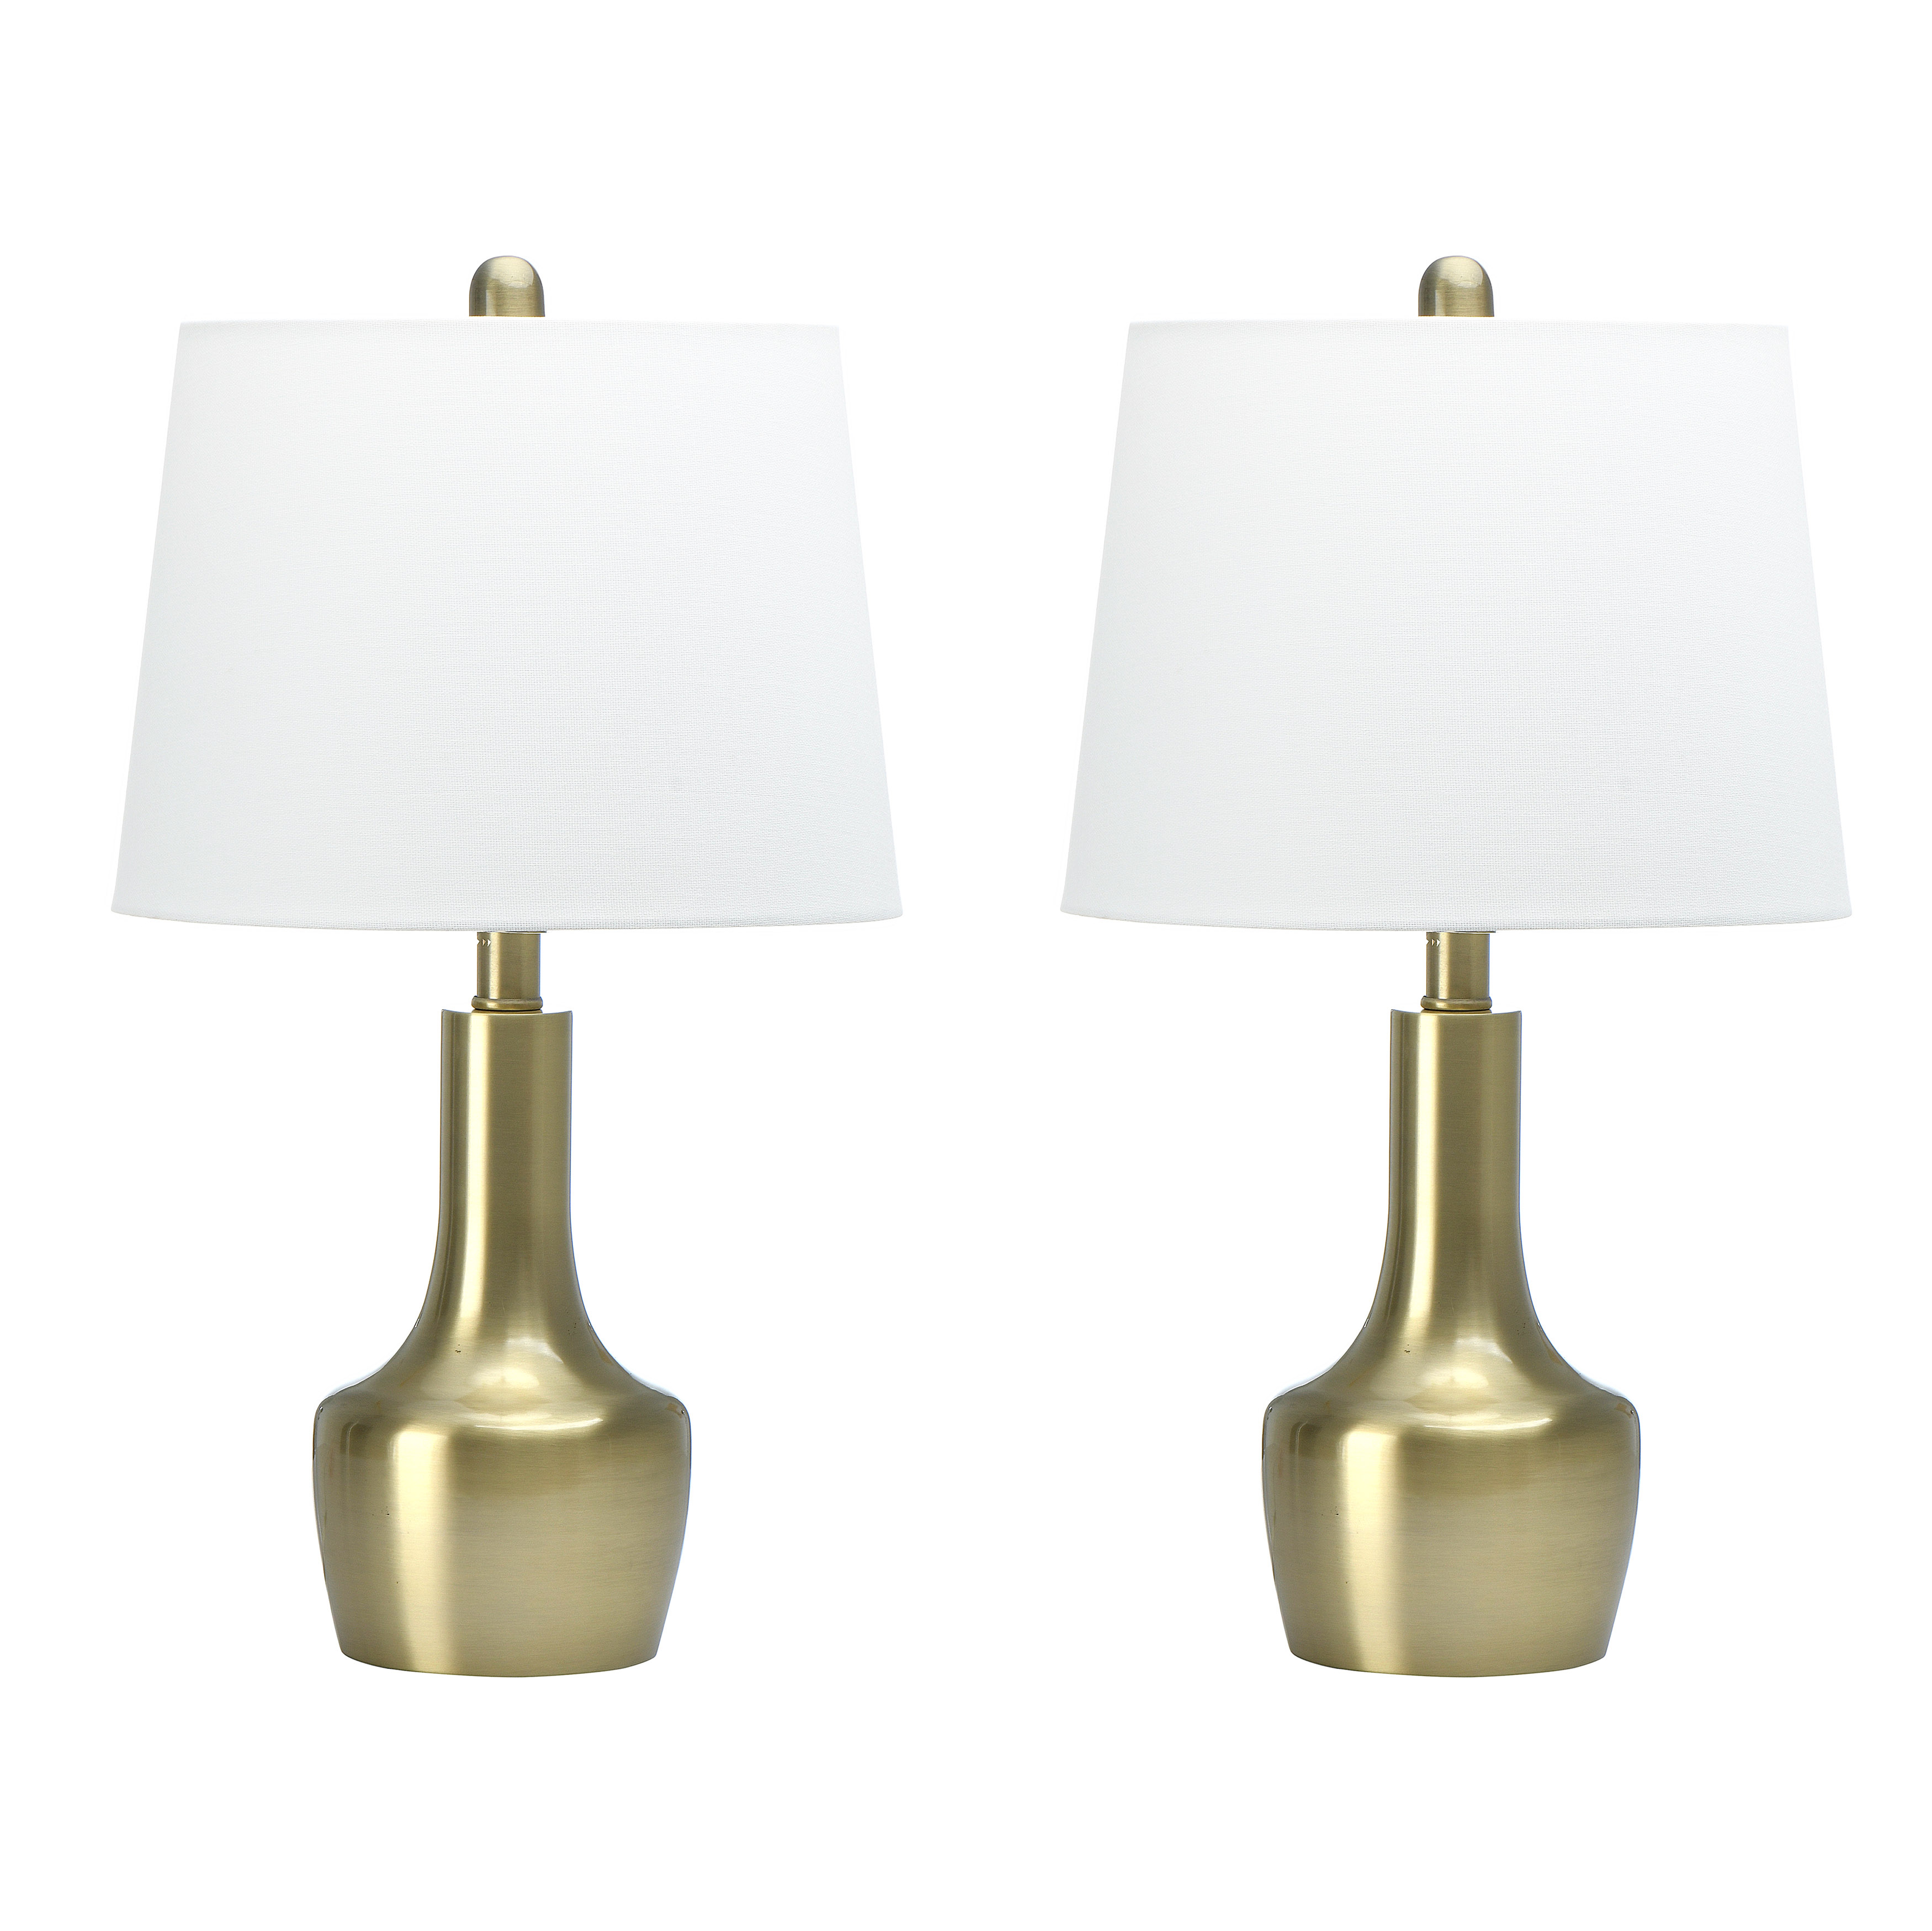 Urn Shaped Table Lamps, Brass, 22" Set of 2 - Nomad Home